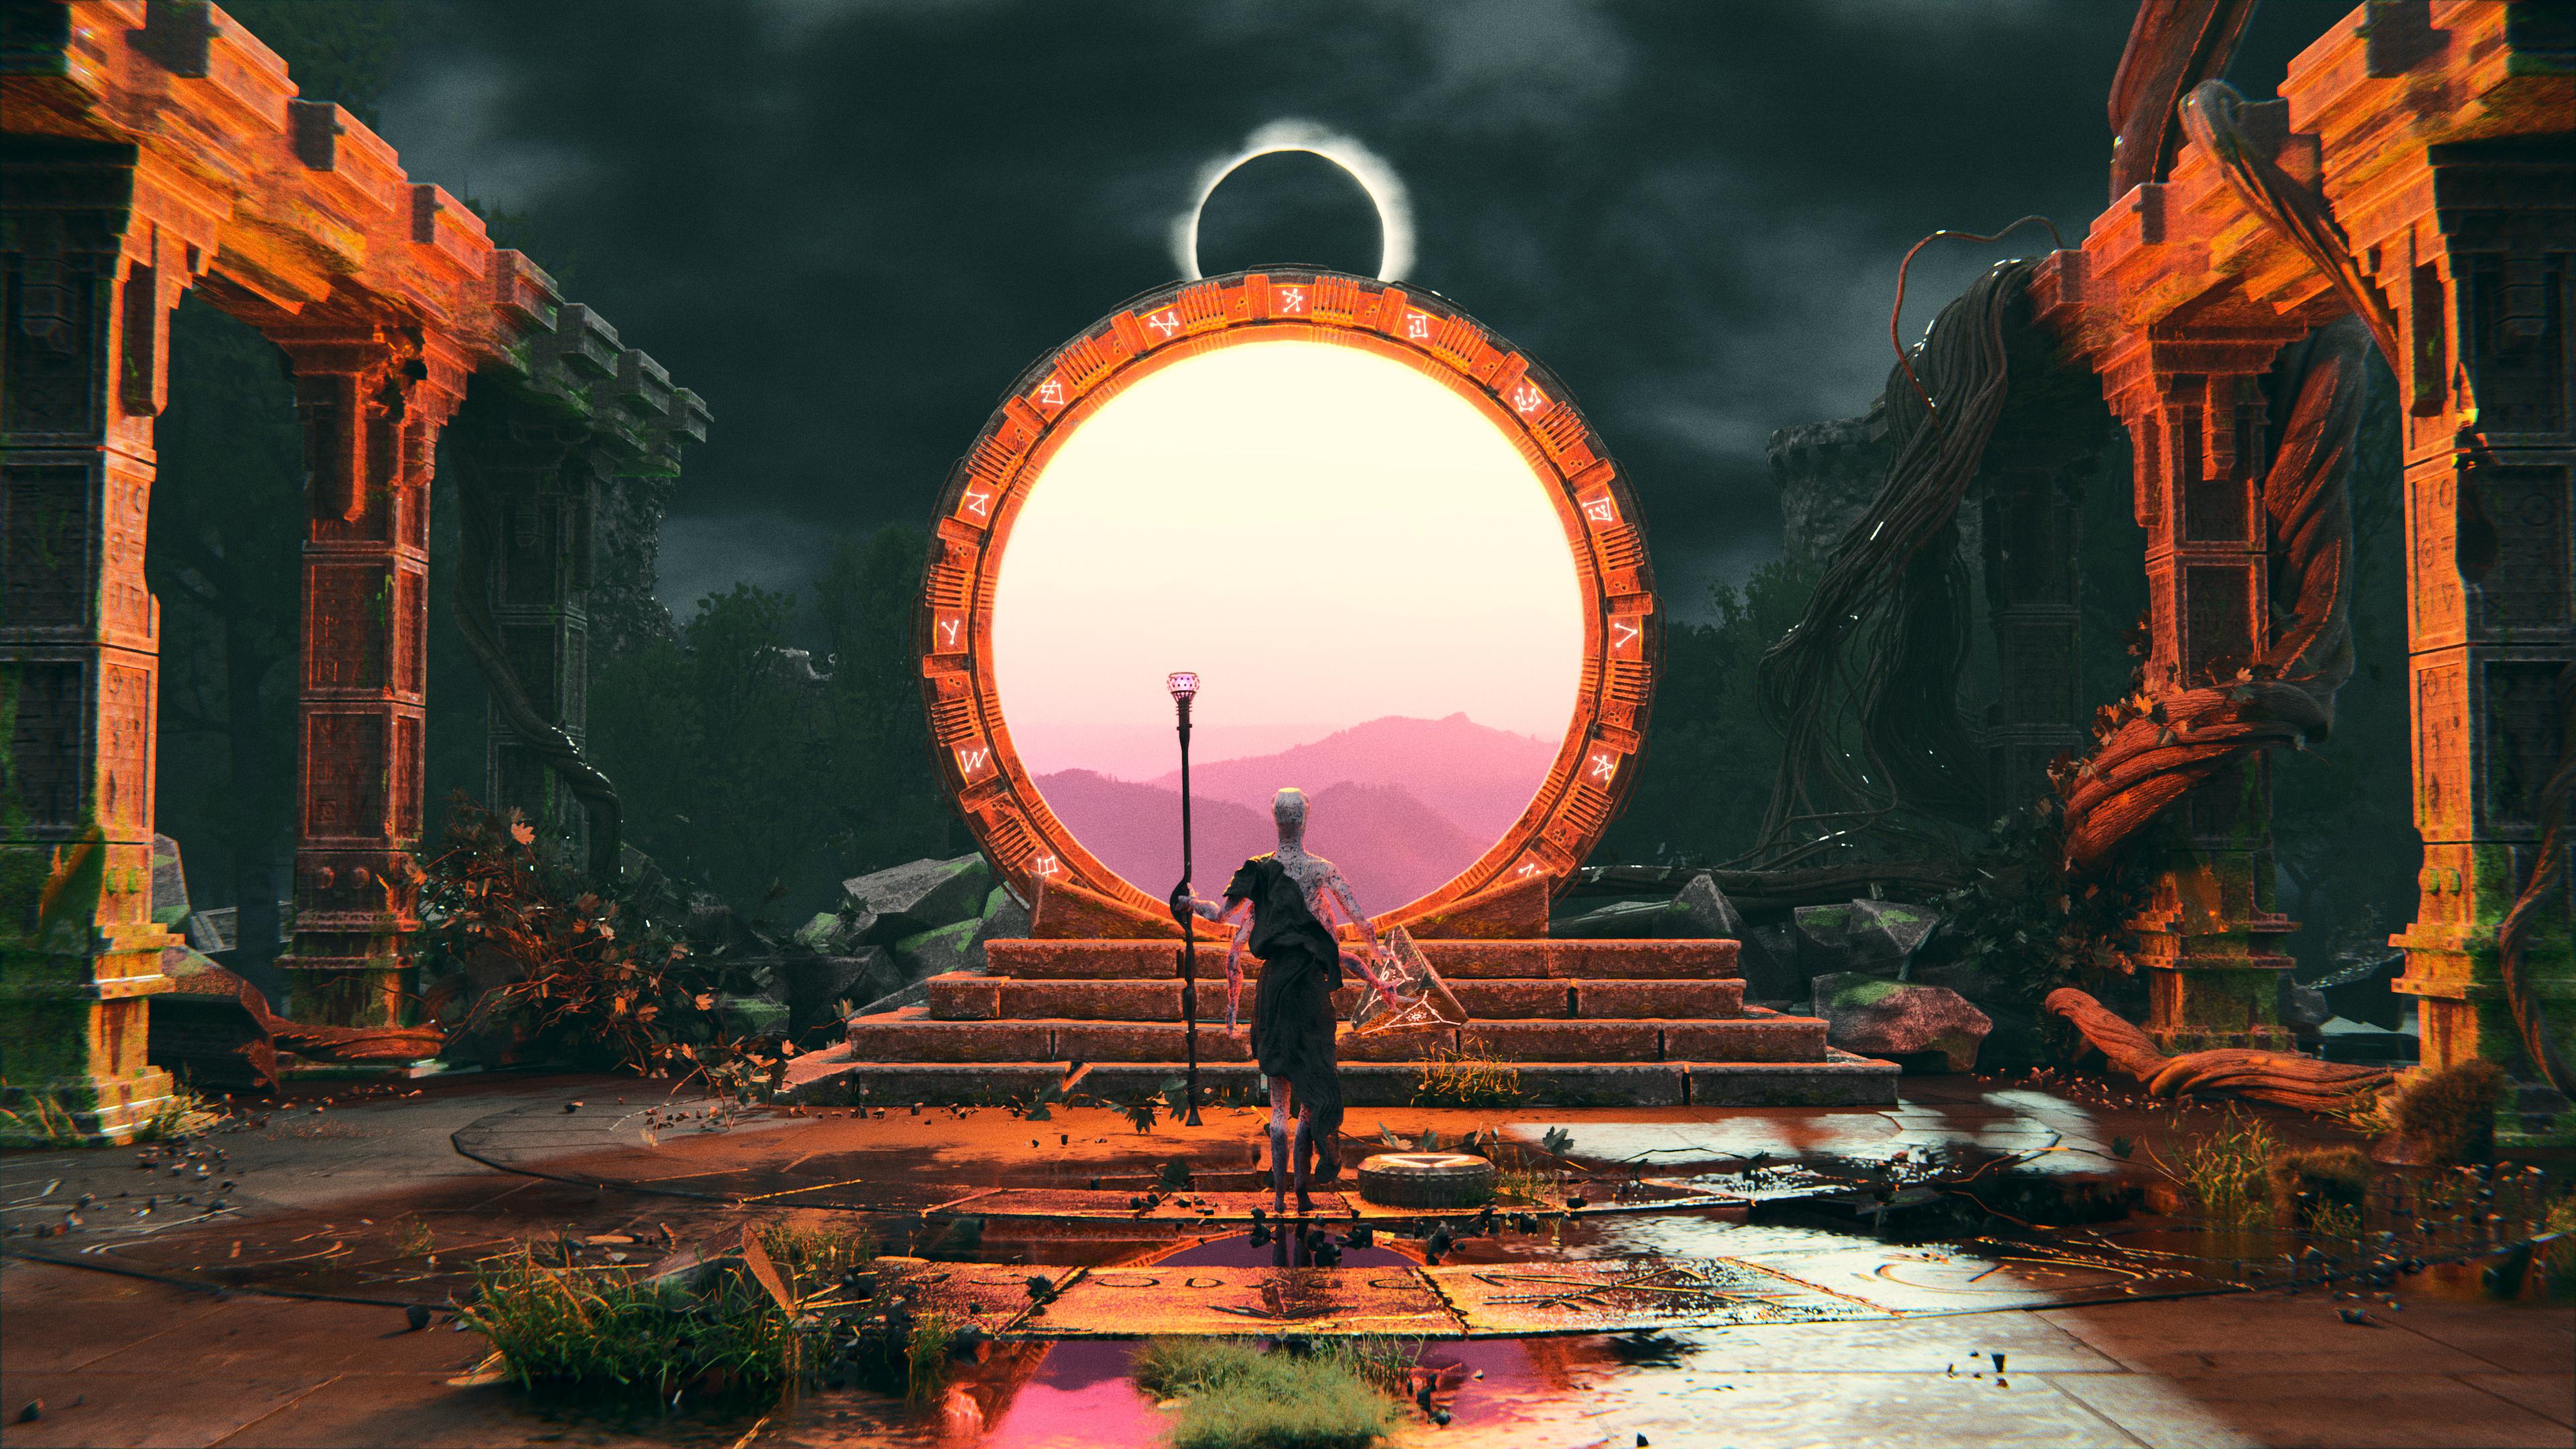 Far away some other stargate just opened. by Eduard Leszczynski